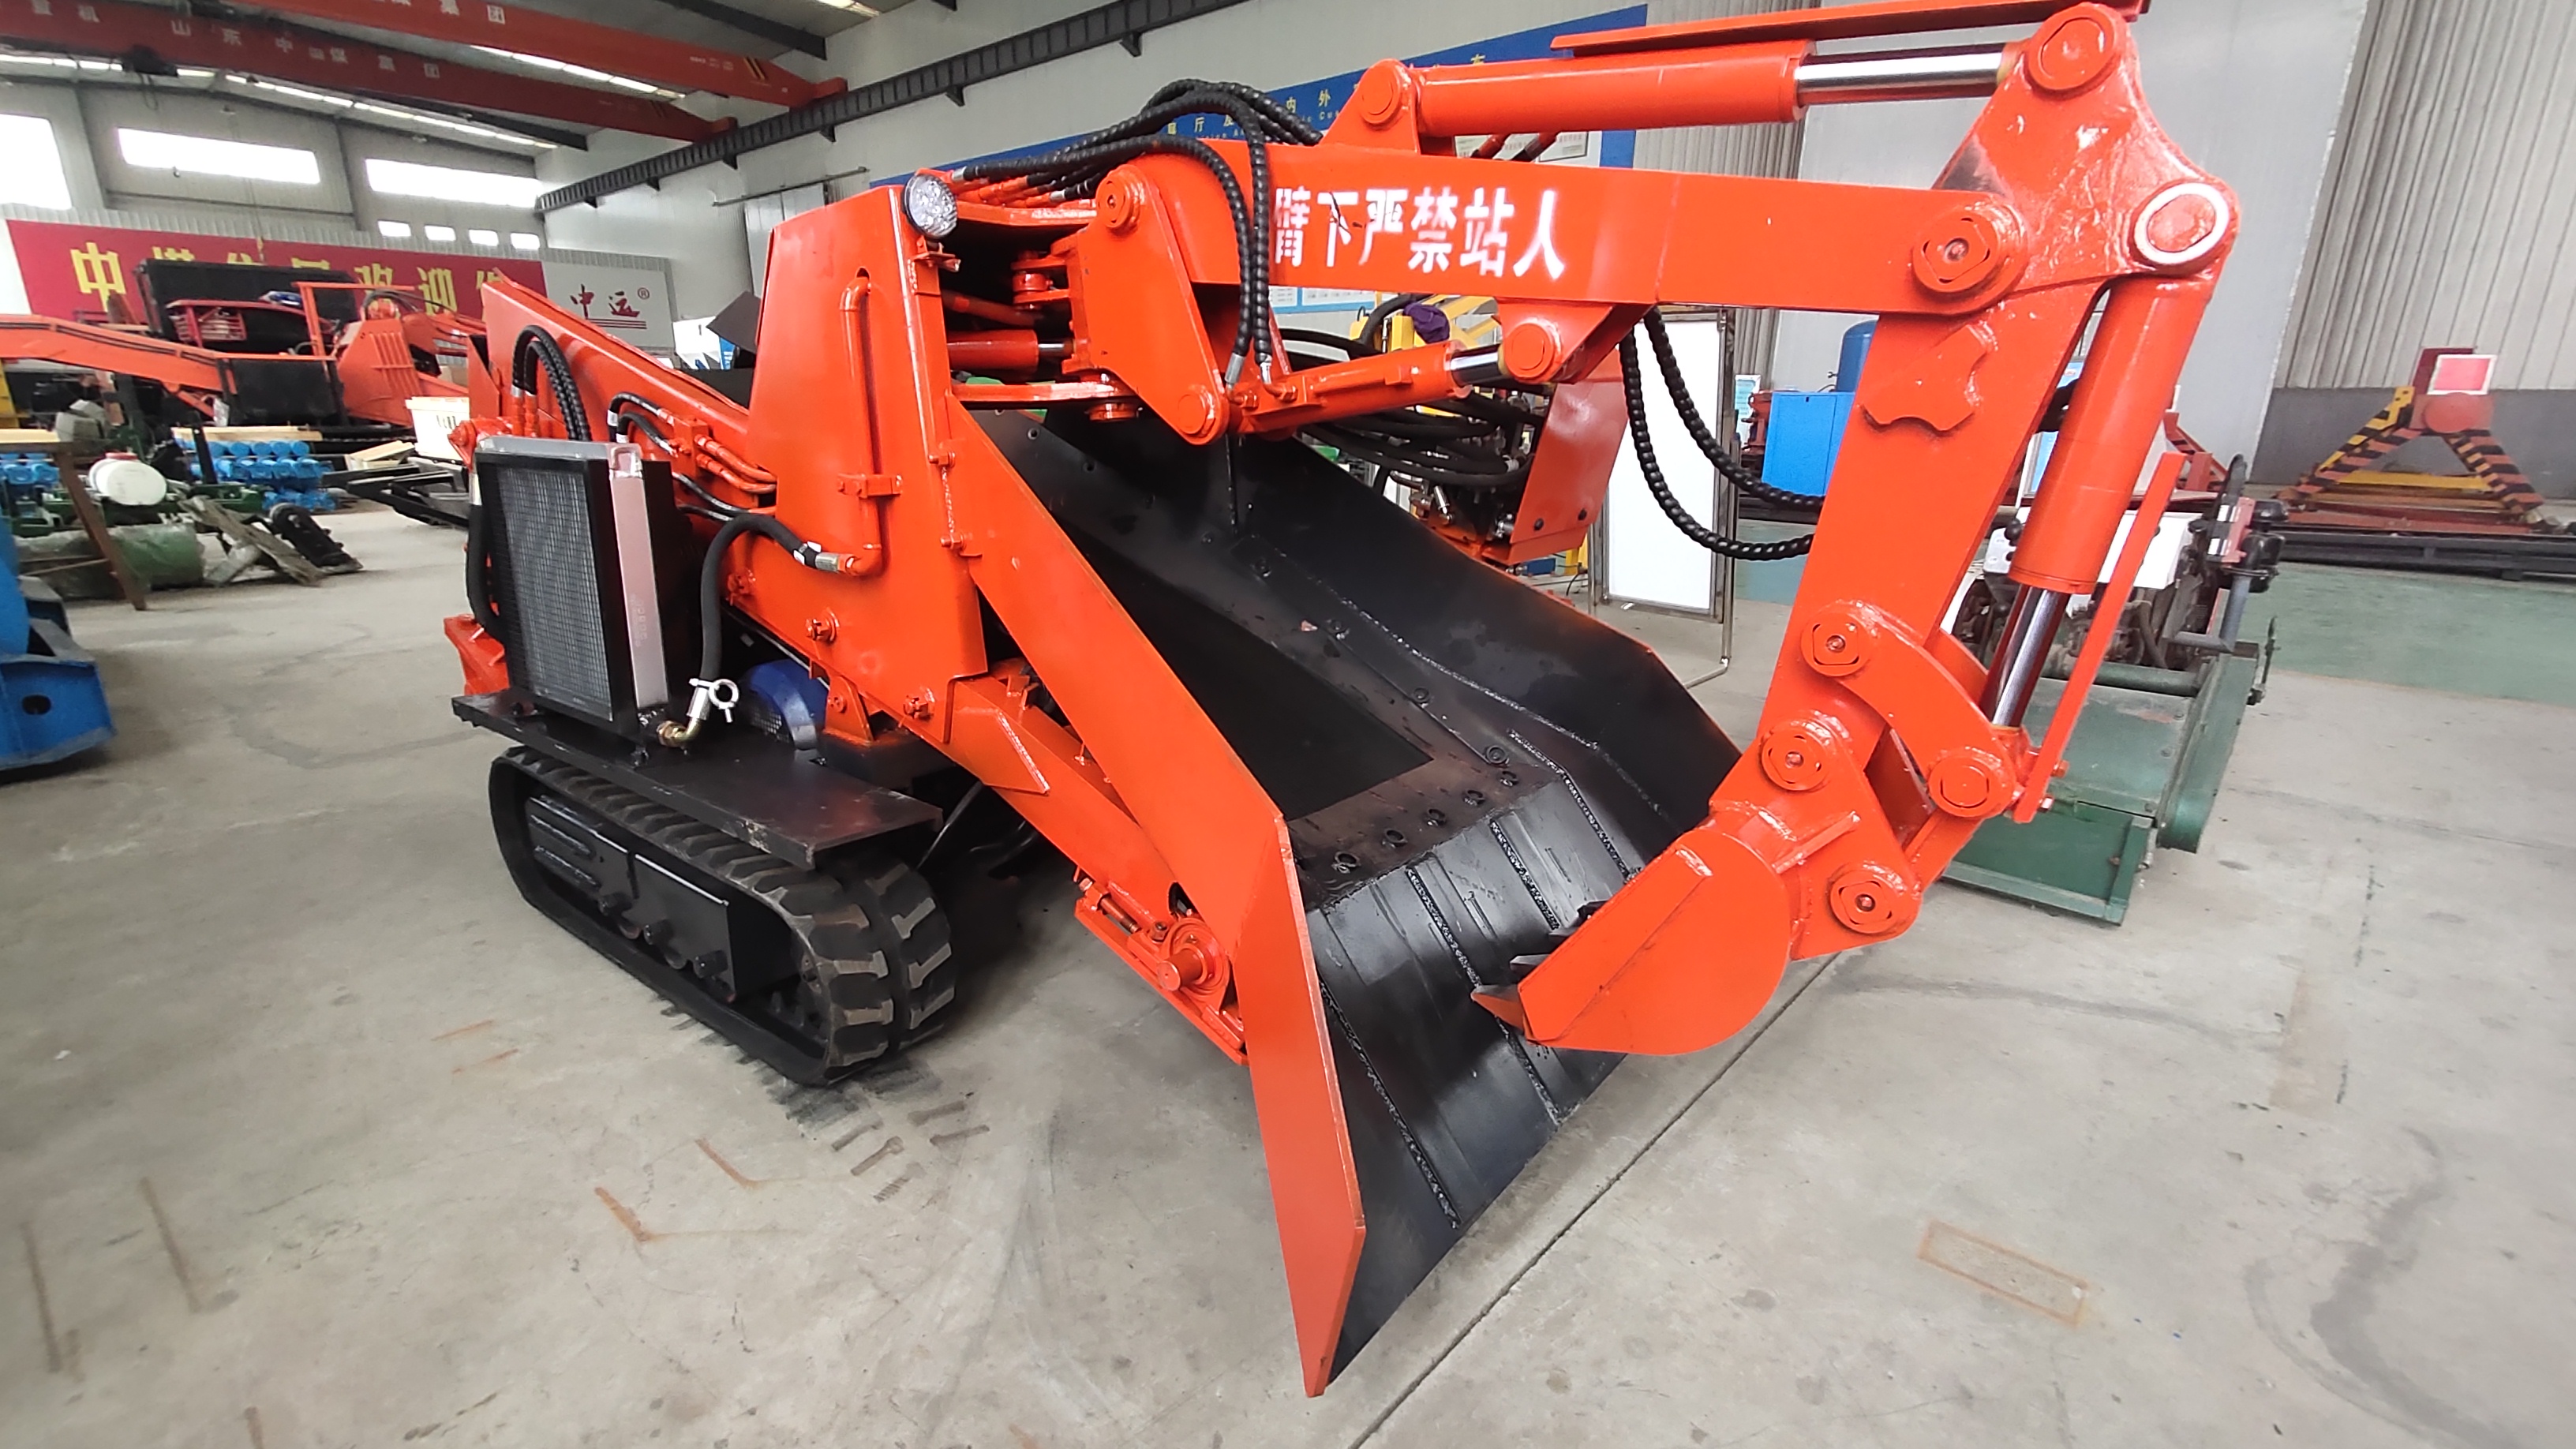 Do You Know What Are The Characteristics Of The Crawler Mucking Loader Chassis?